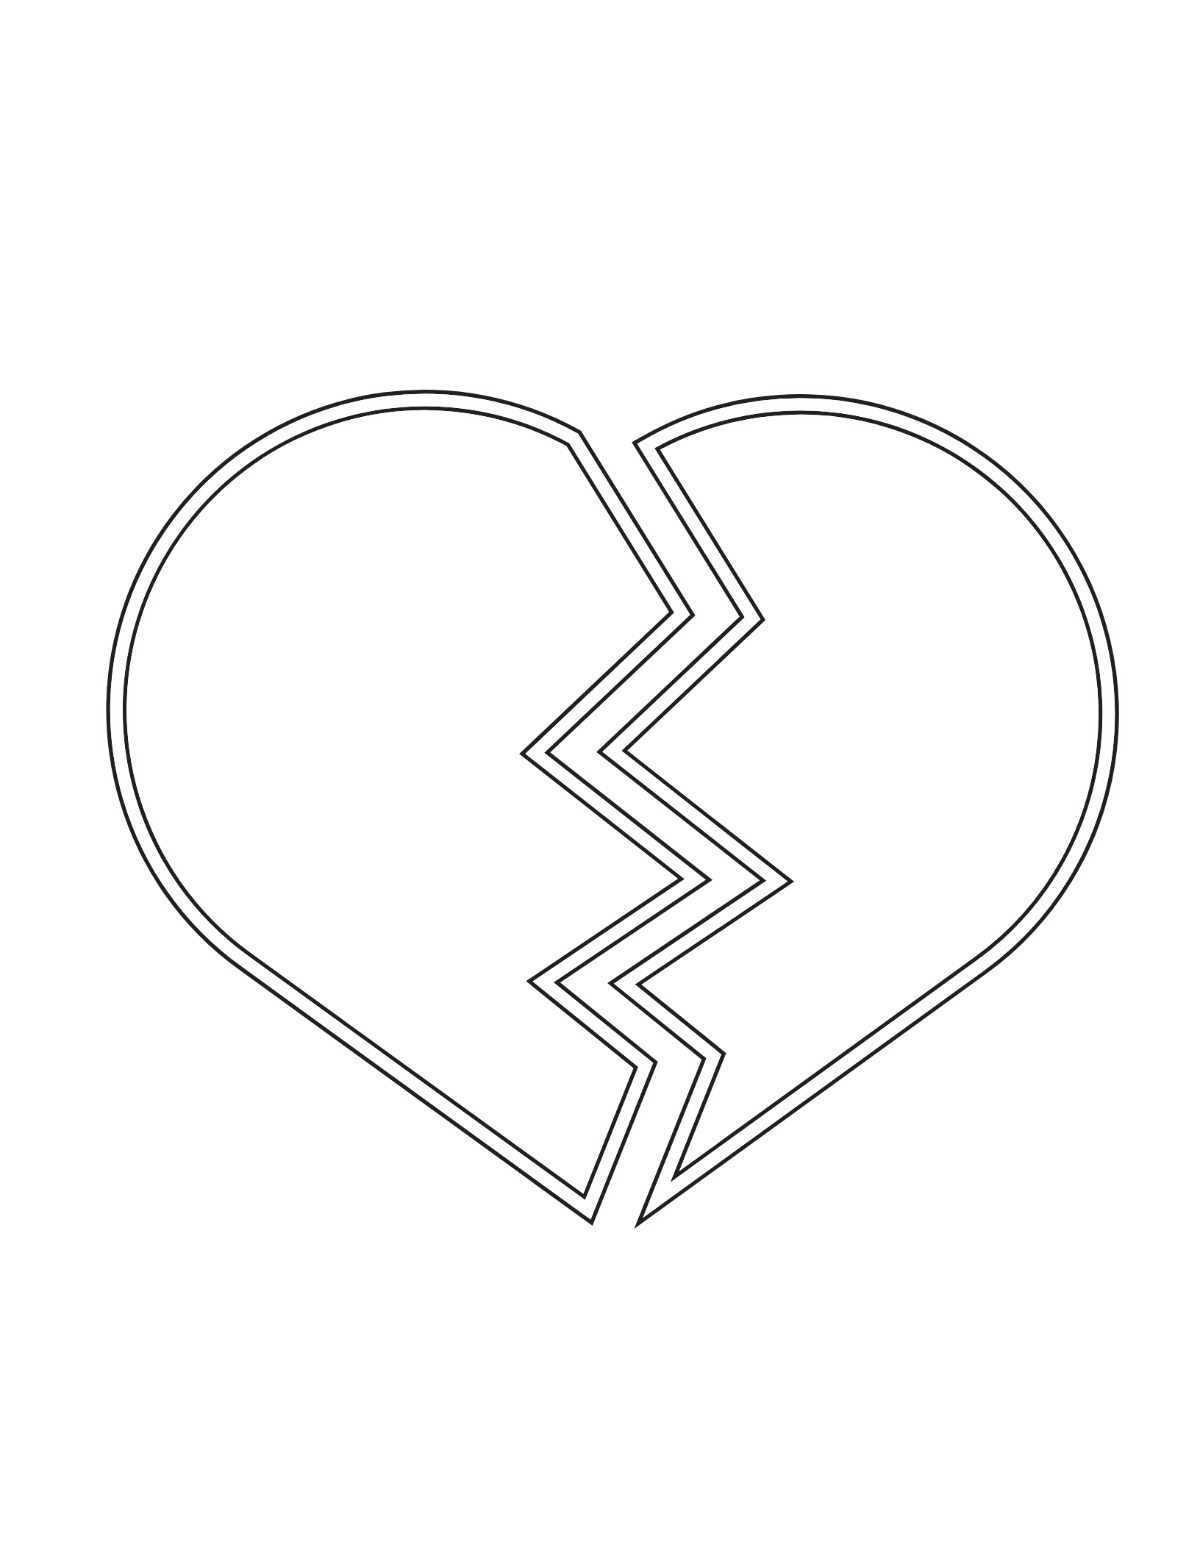 Broken Heart Outline Coloring Page Template